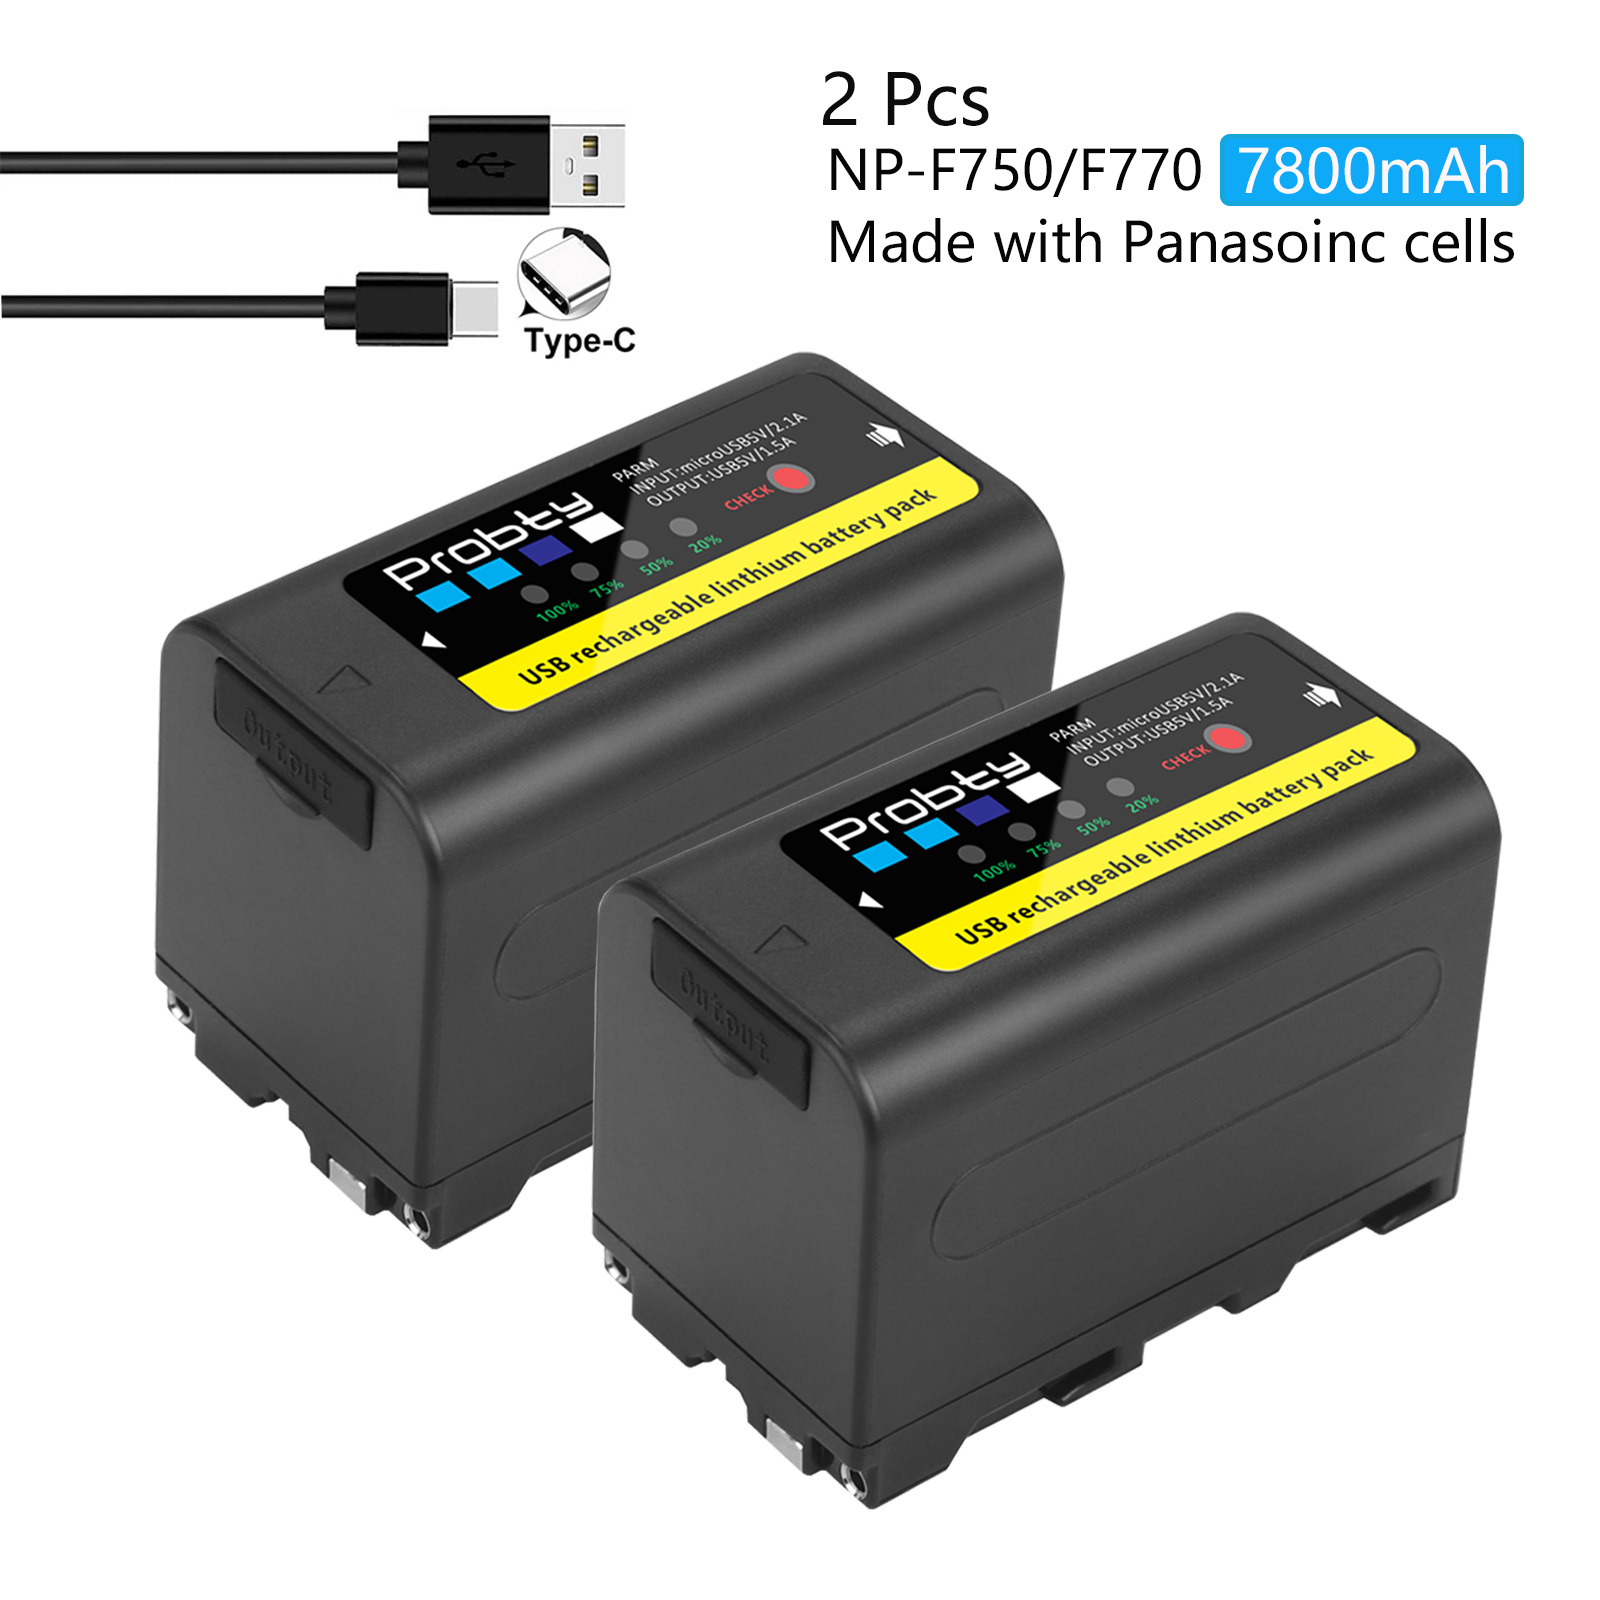 NP-F980 NP-F970 NPF960 NPF970 Chargable Battery Made With Japan Cells For  Sony PLM 100 CCD-TRV35 MVC-FD91 MC1500C Lazada PH